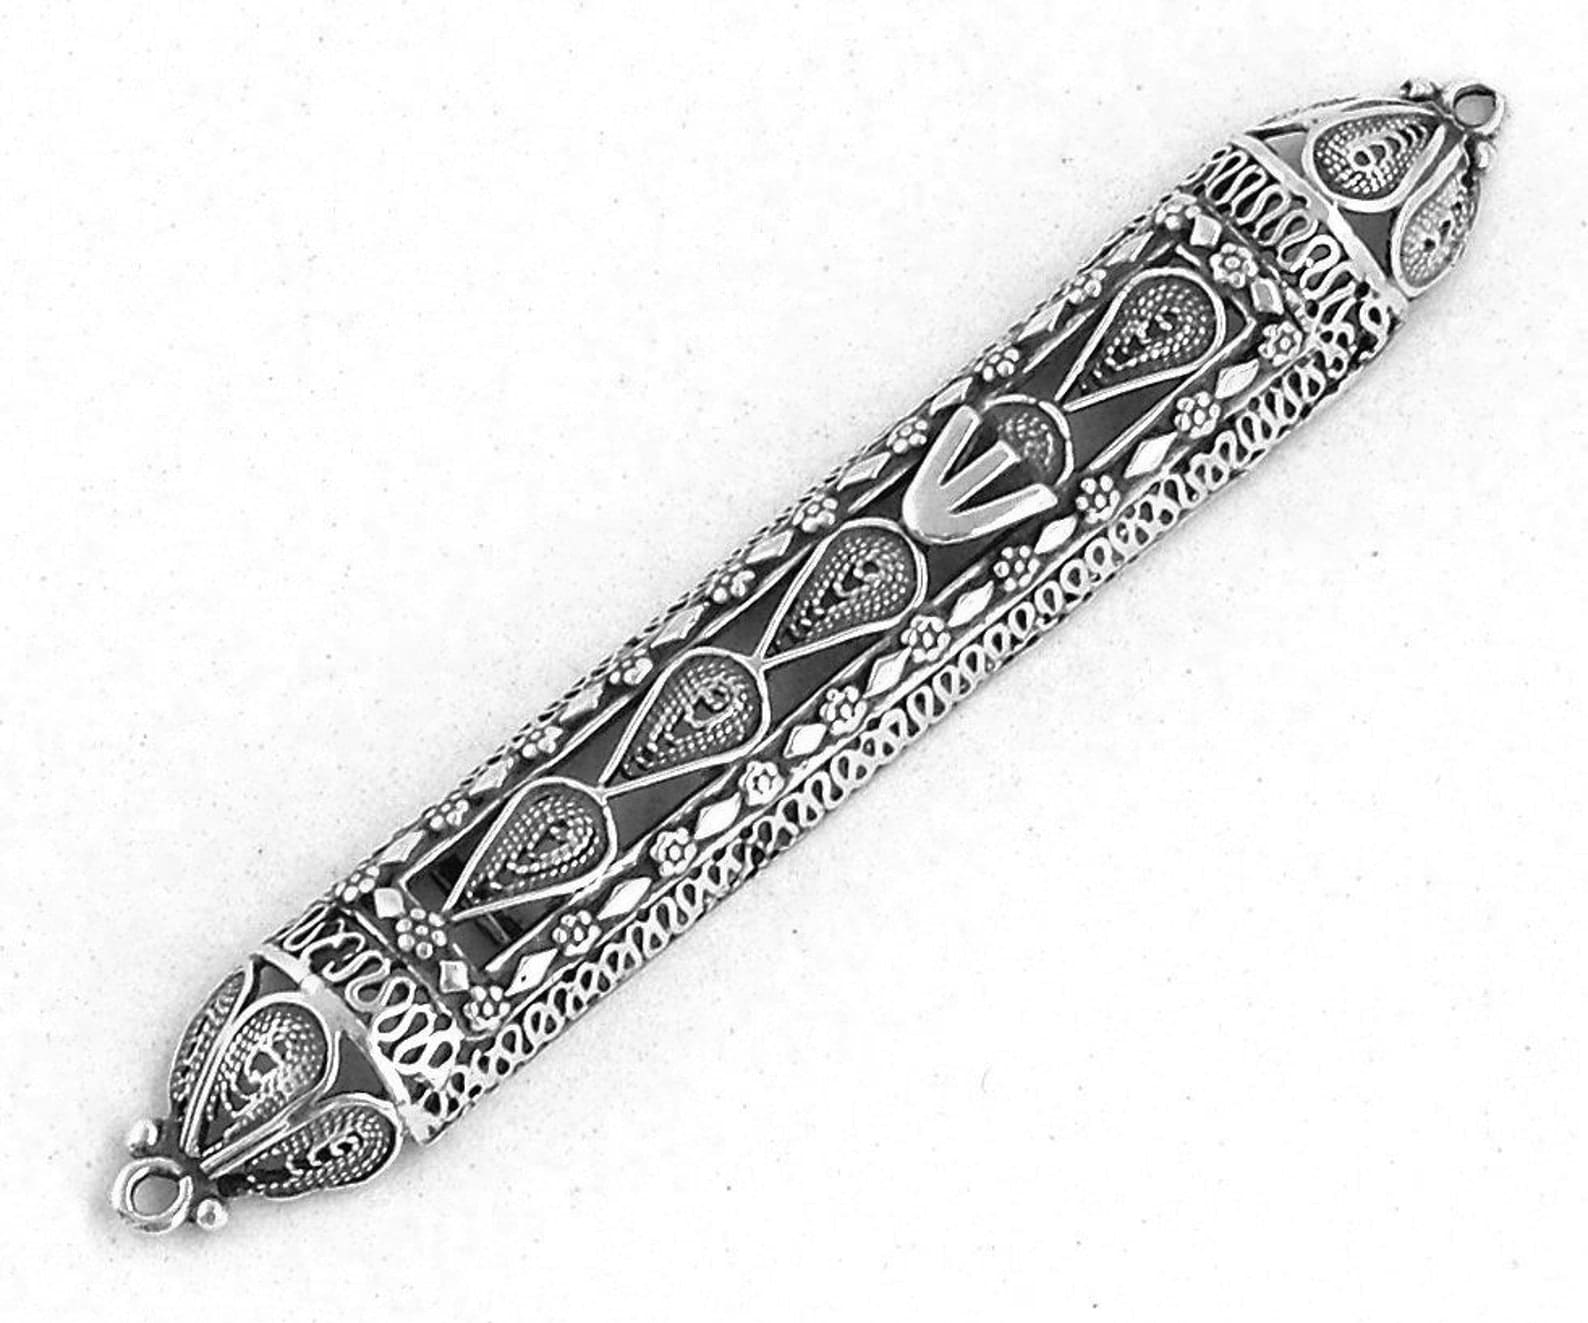 Sterling Silver Decorated Mezuzah Case